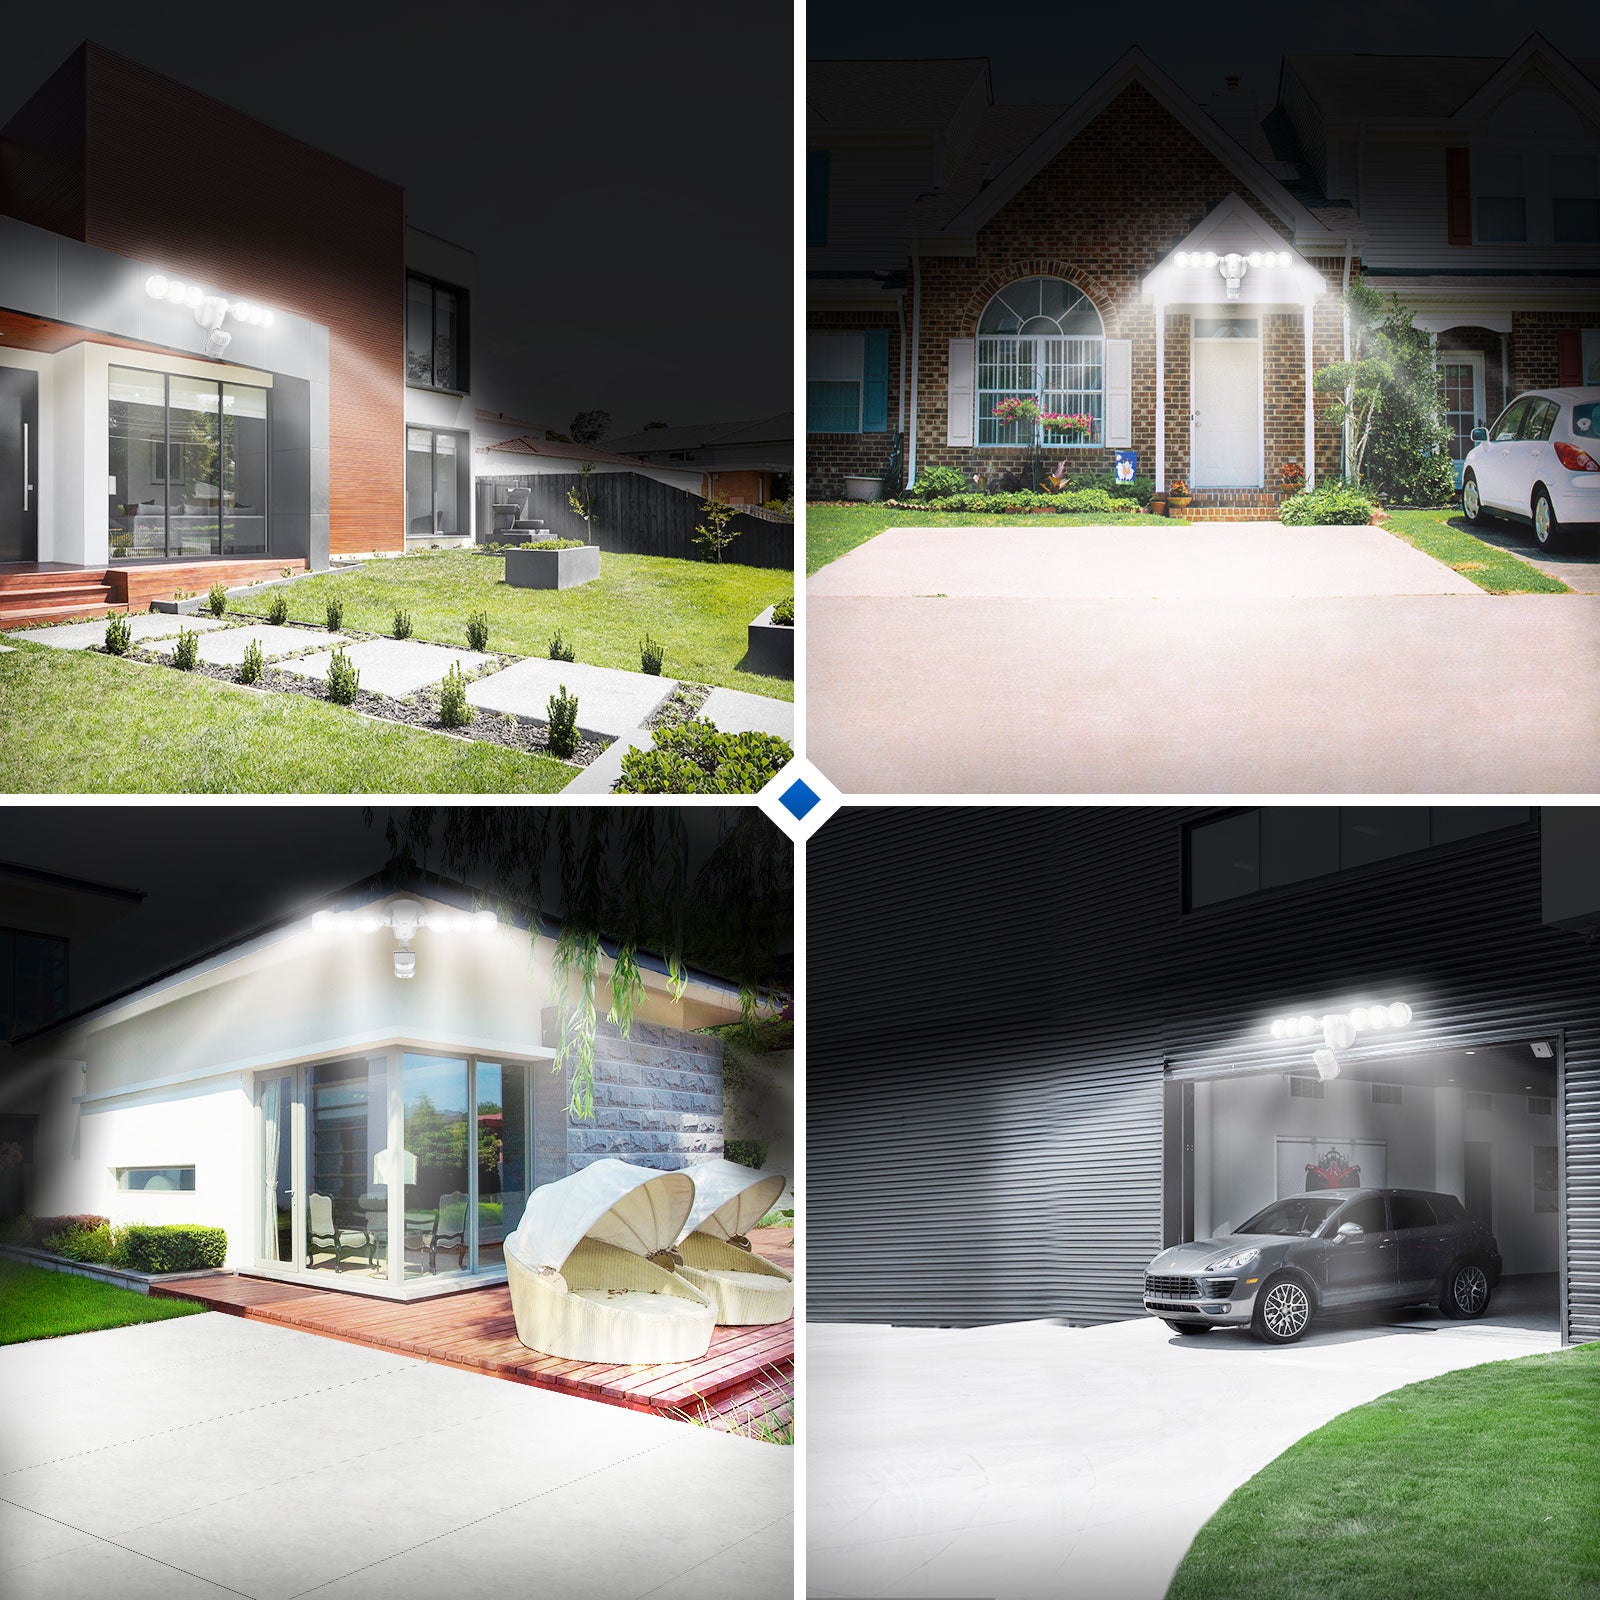 45W LED Security Light with the function of Dusk to Dawn and Motion Sensor, suitable for park, yard, garage and extra